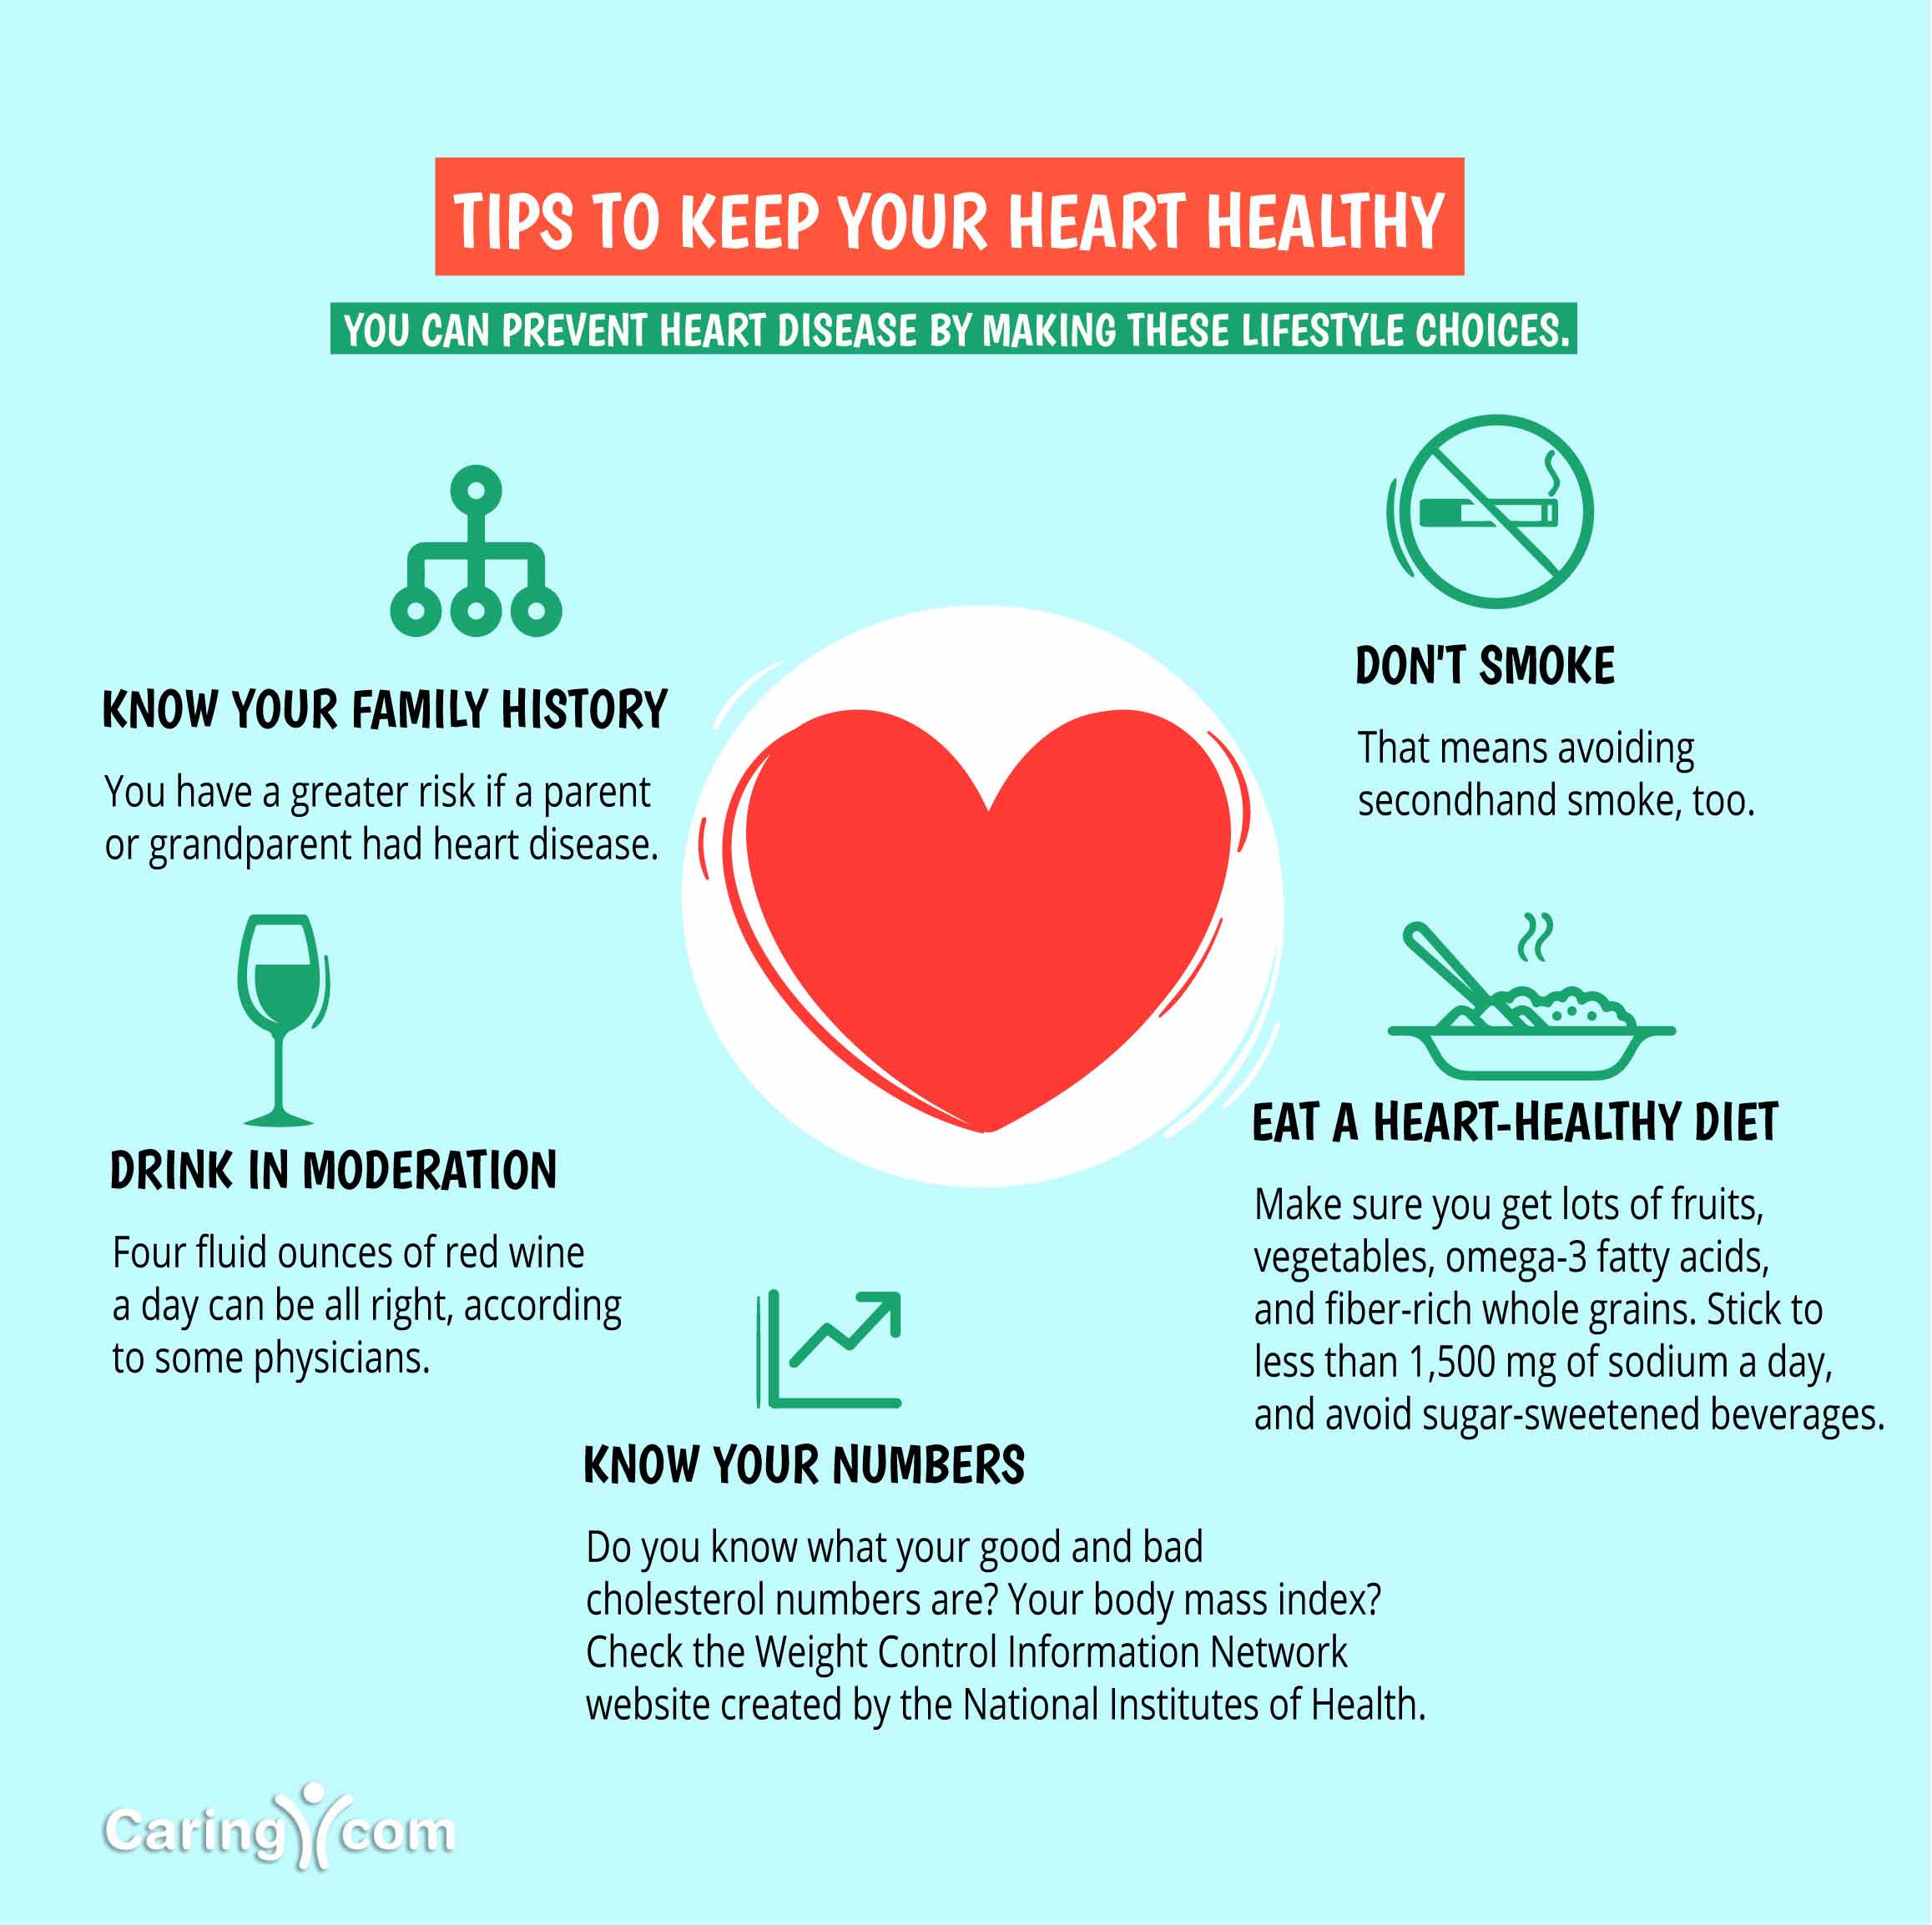 Tips to Keep Your Heart Healthy | Caring.com